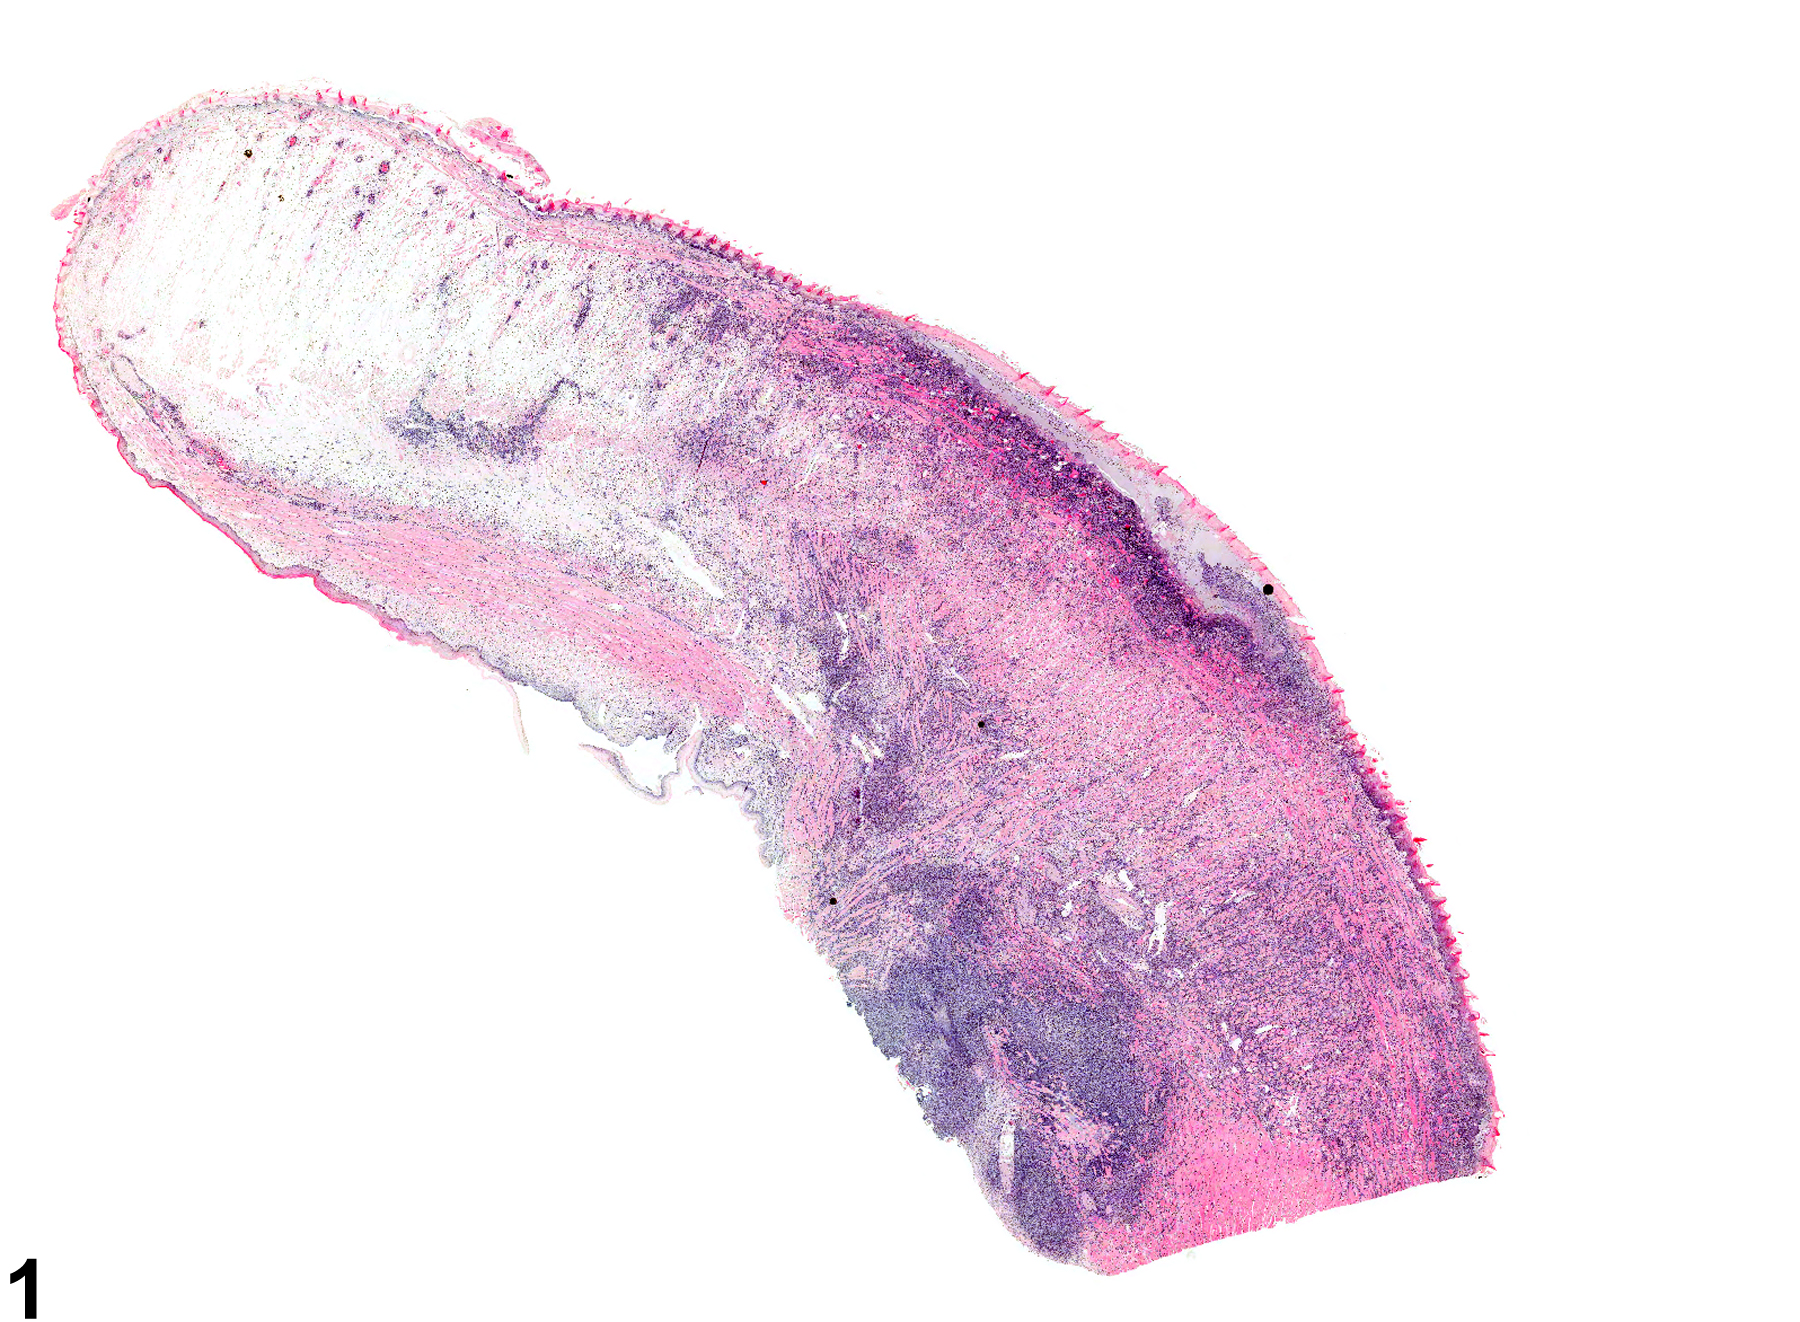 Image of necrosis in the tongue from a male Swiss CD-1 mouse in a chronic study